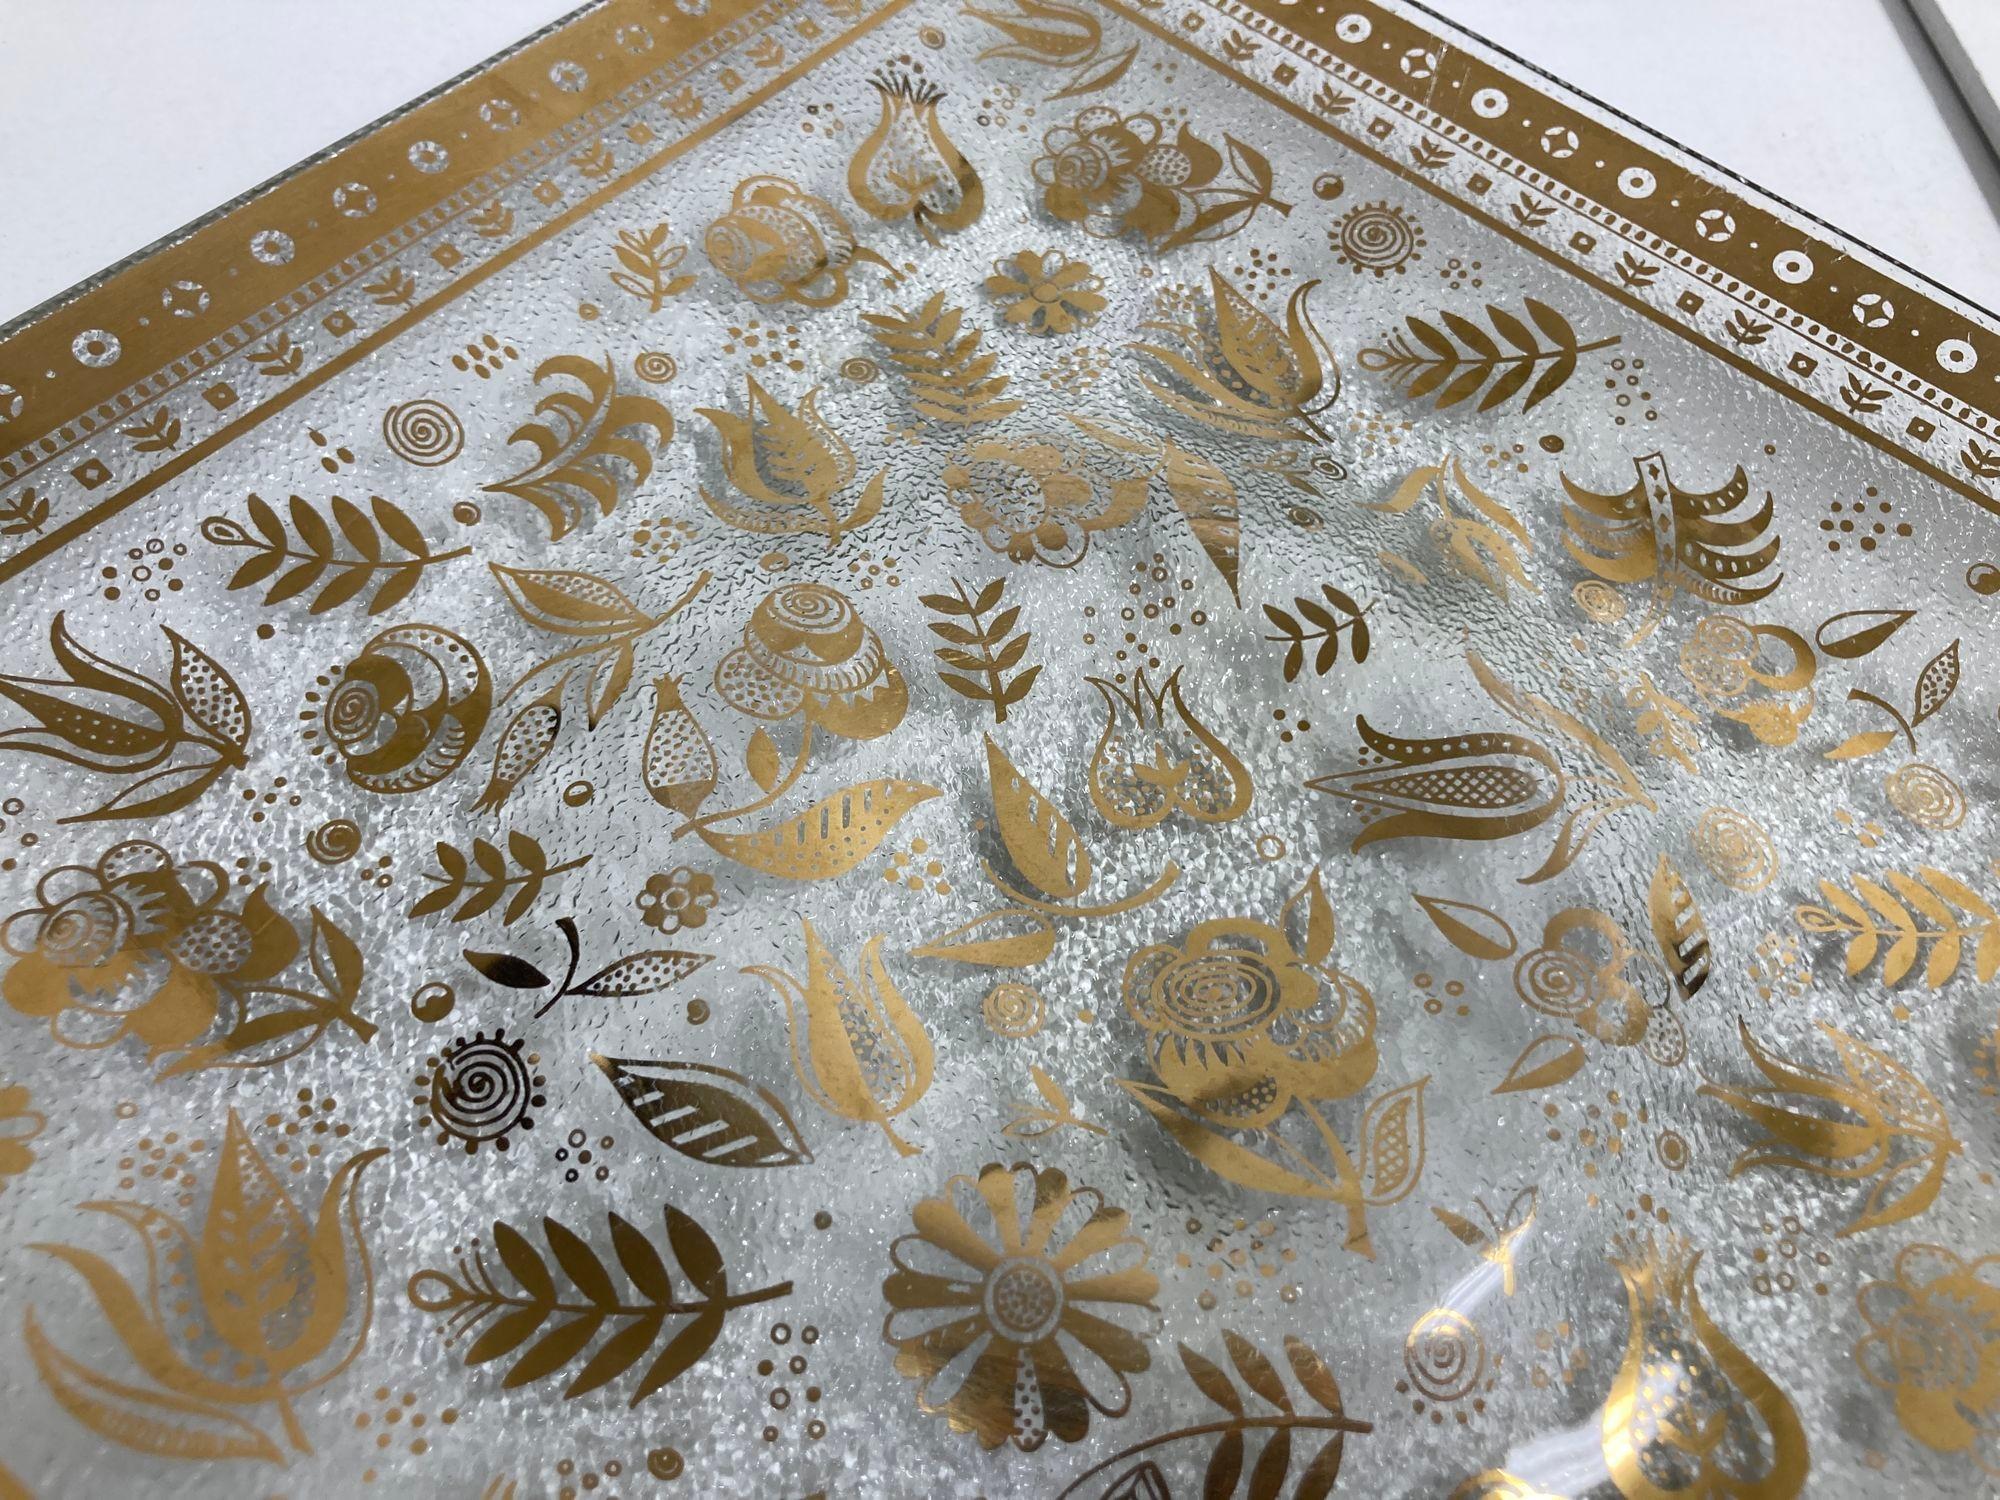 1960s Georges Briard Bent Glass Tray Persian Garden Pattern Dish 4